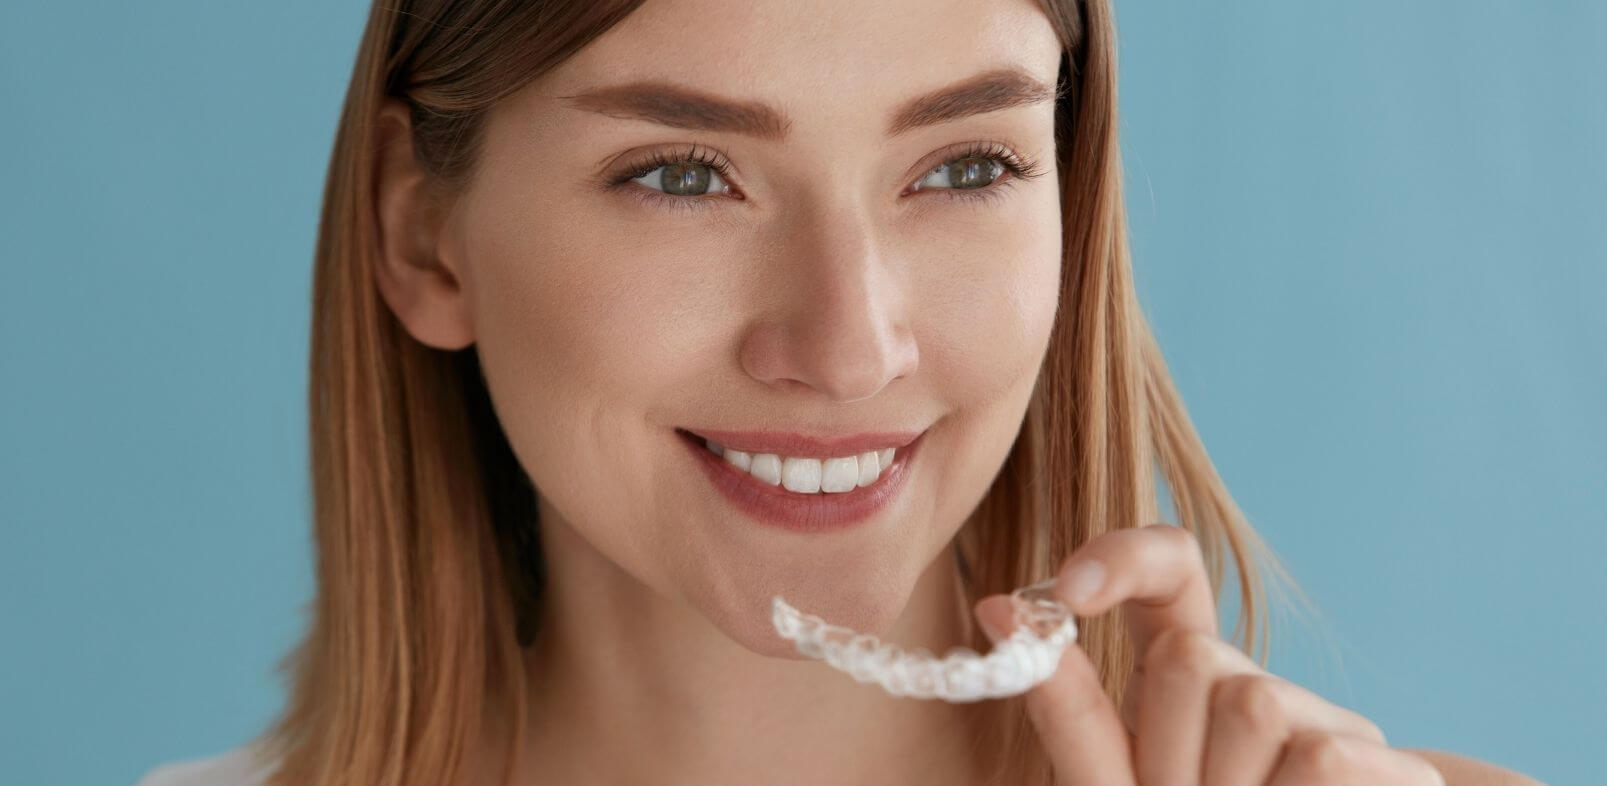 Woman putting in Invisalign braces at Ripon dental practice